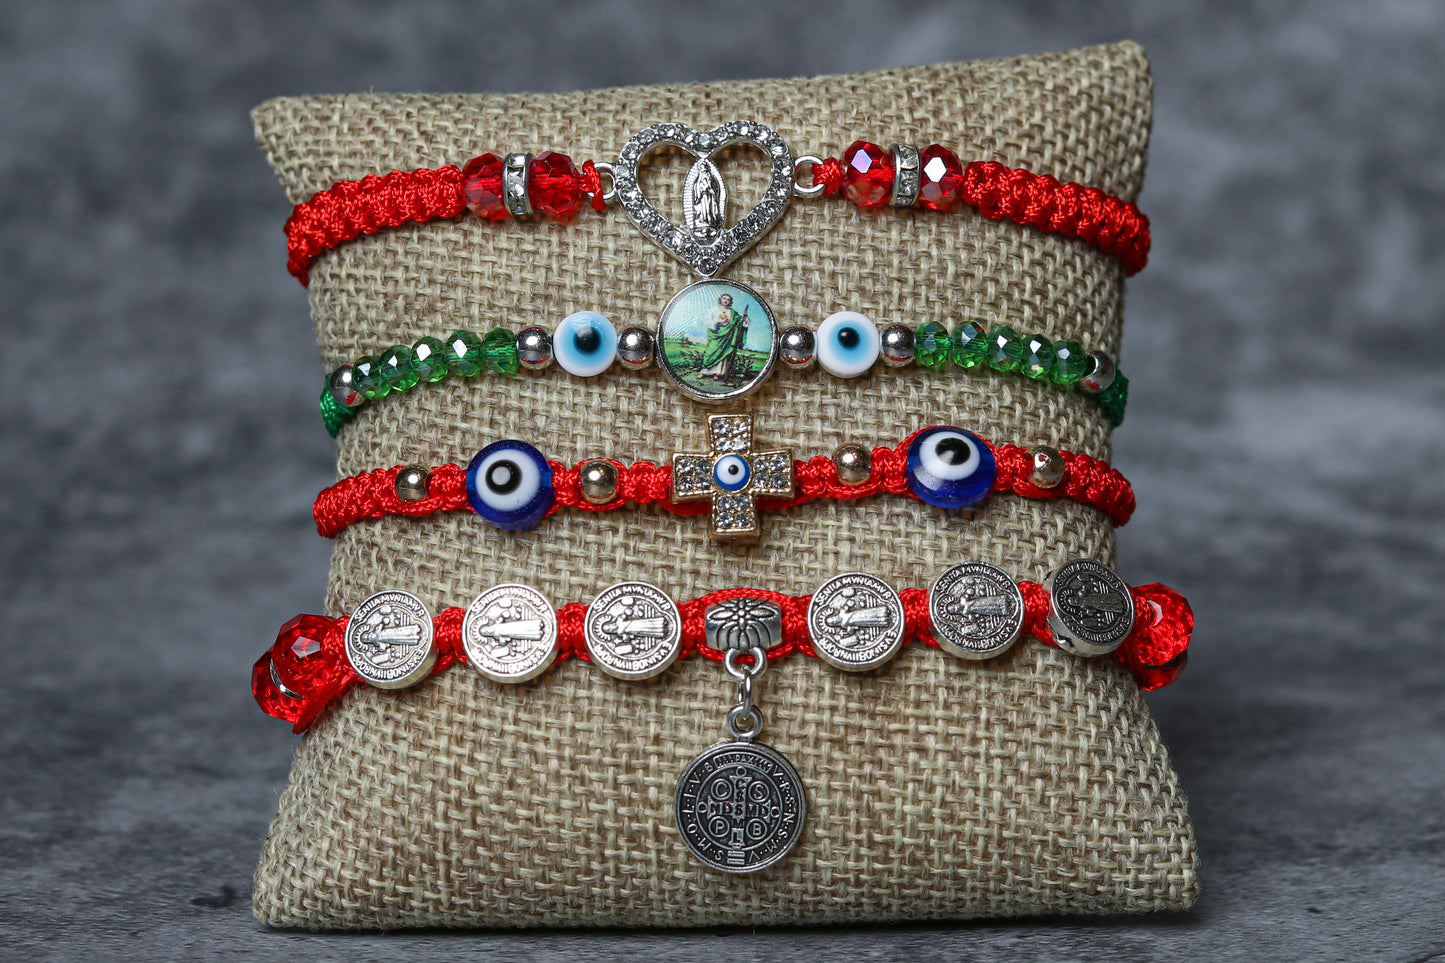 Four-charm bracelet package with different design. The first bracelet features a beautiful virgin mary charm, the second bracelet boasts a san benito charm, the third bracelet features a san juditas charm, and the fourth bracelet showcases an evil eye charm